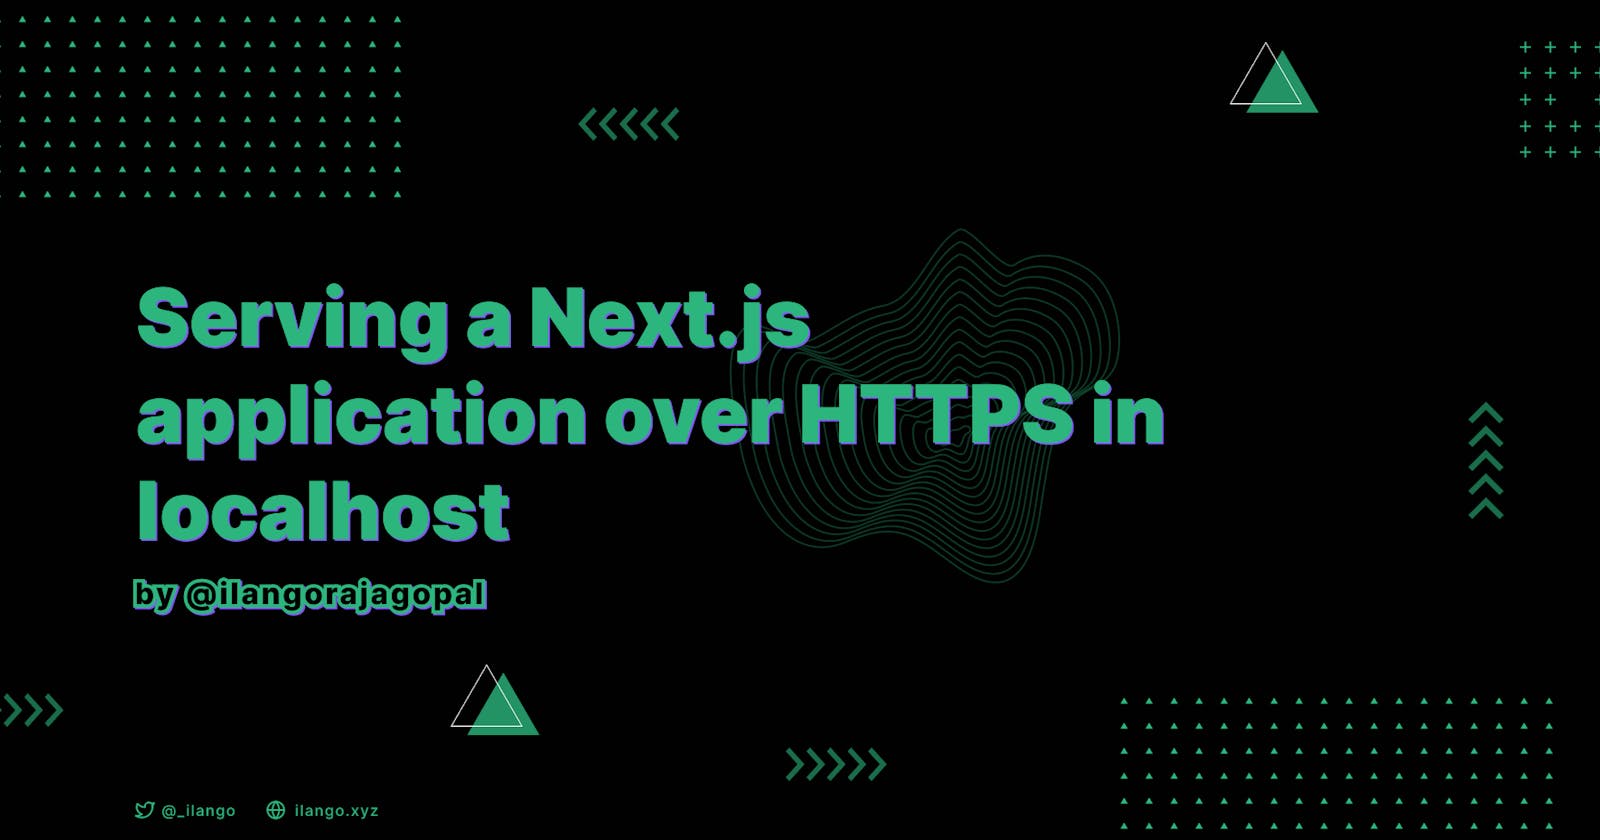 Serving a Next.js application over HTTPS in localhost